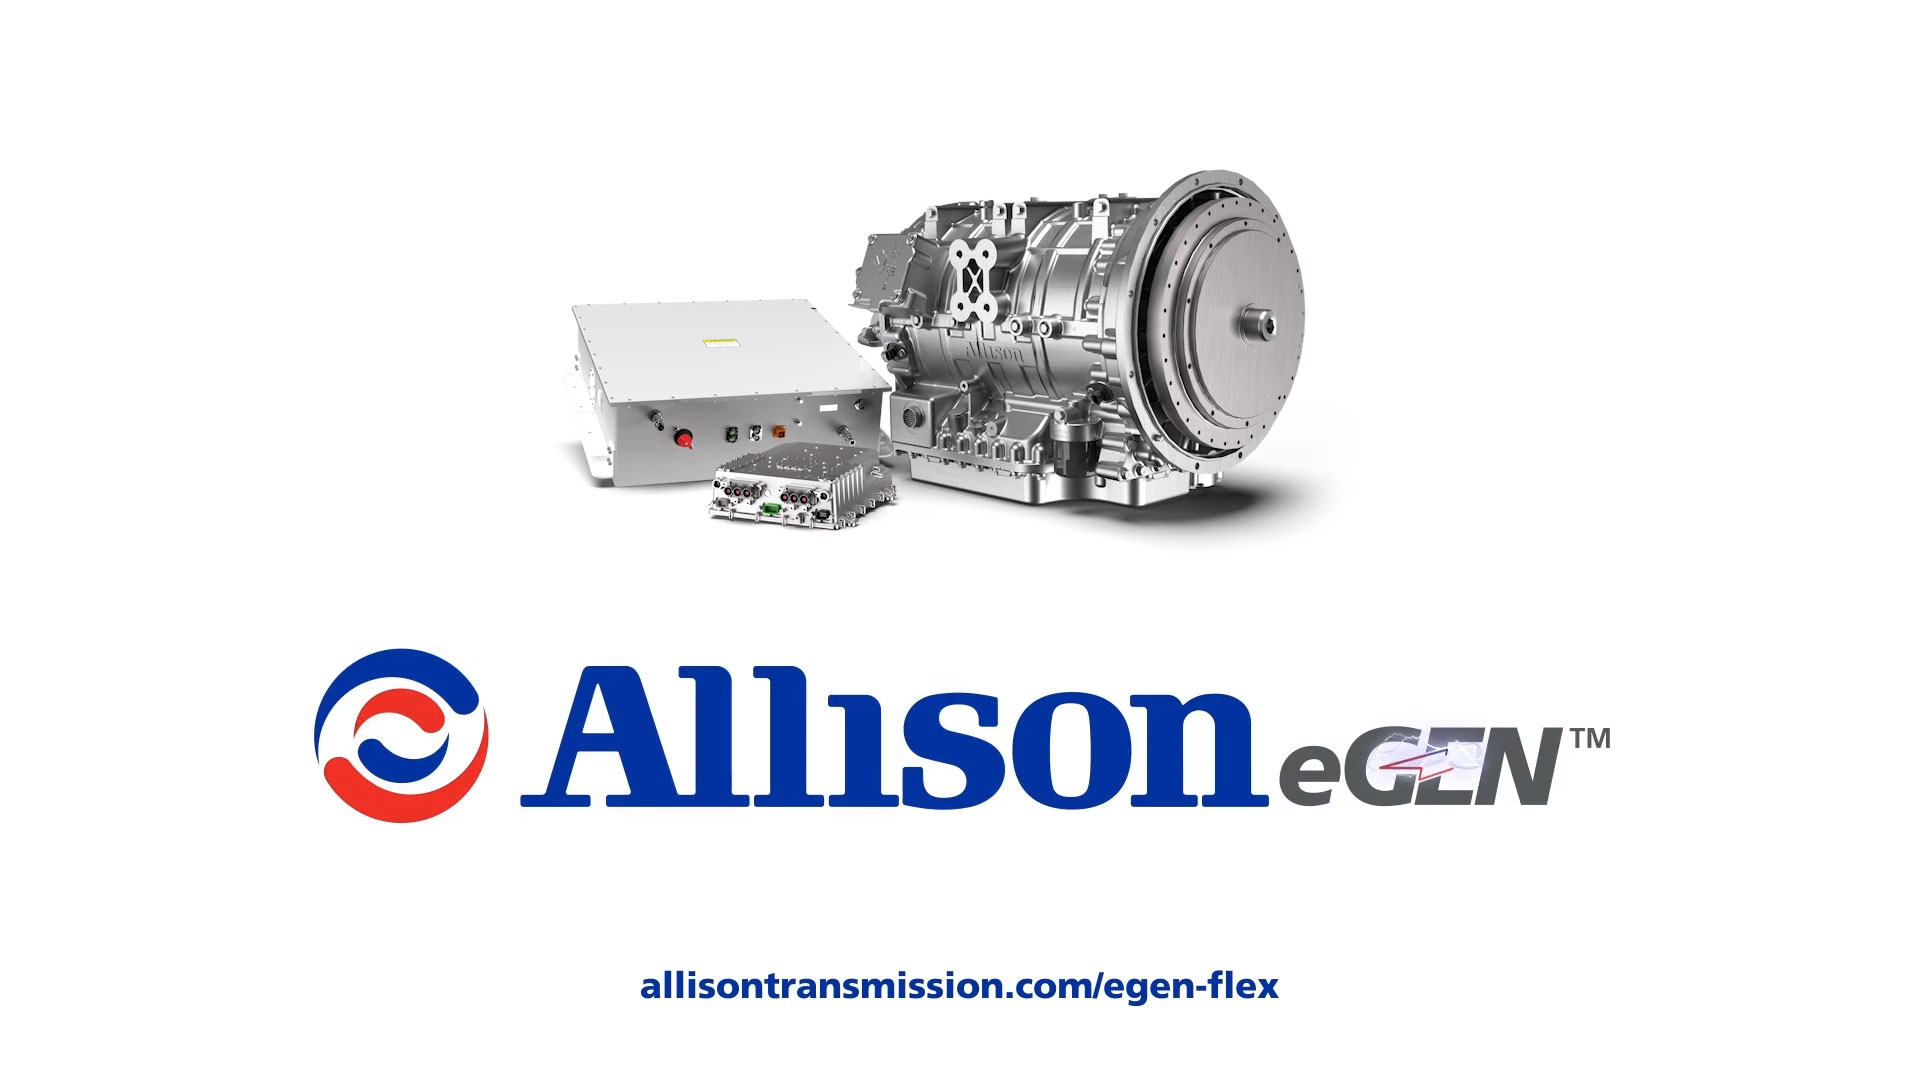 The Allison eGen Flex™ system’s electric-only mode is activated through geofencing technology, which will enable Brownsville’s buses to automatically switch into engine-off mode in pre-defined zero-emission zones.